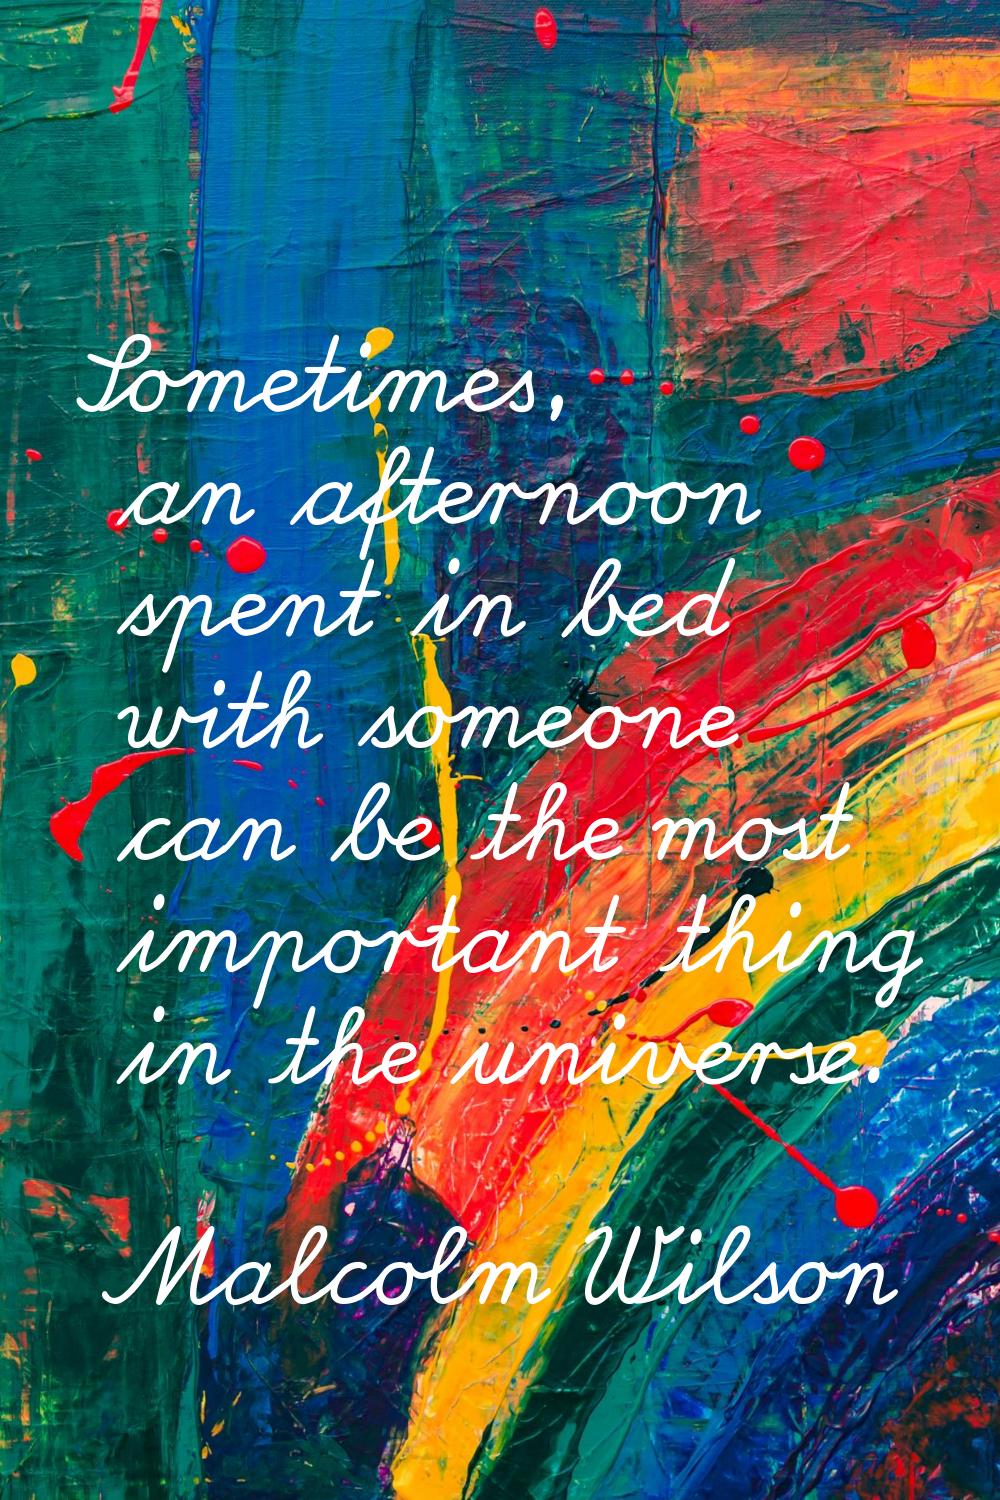 Sometimes, an afternoon spent in bed with someone can be the most important thing in the universe.